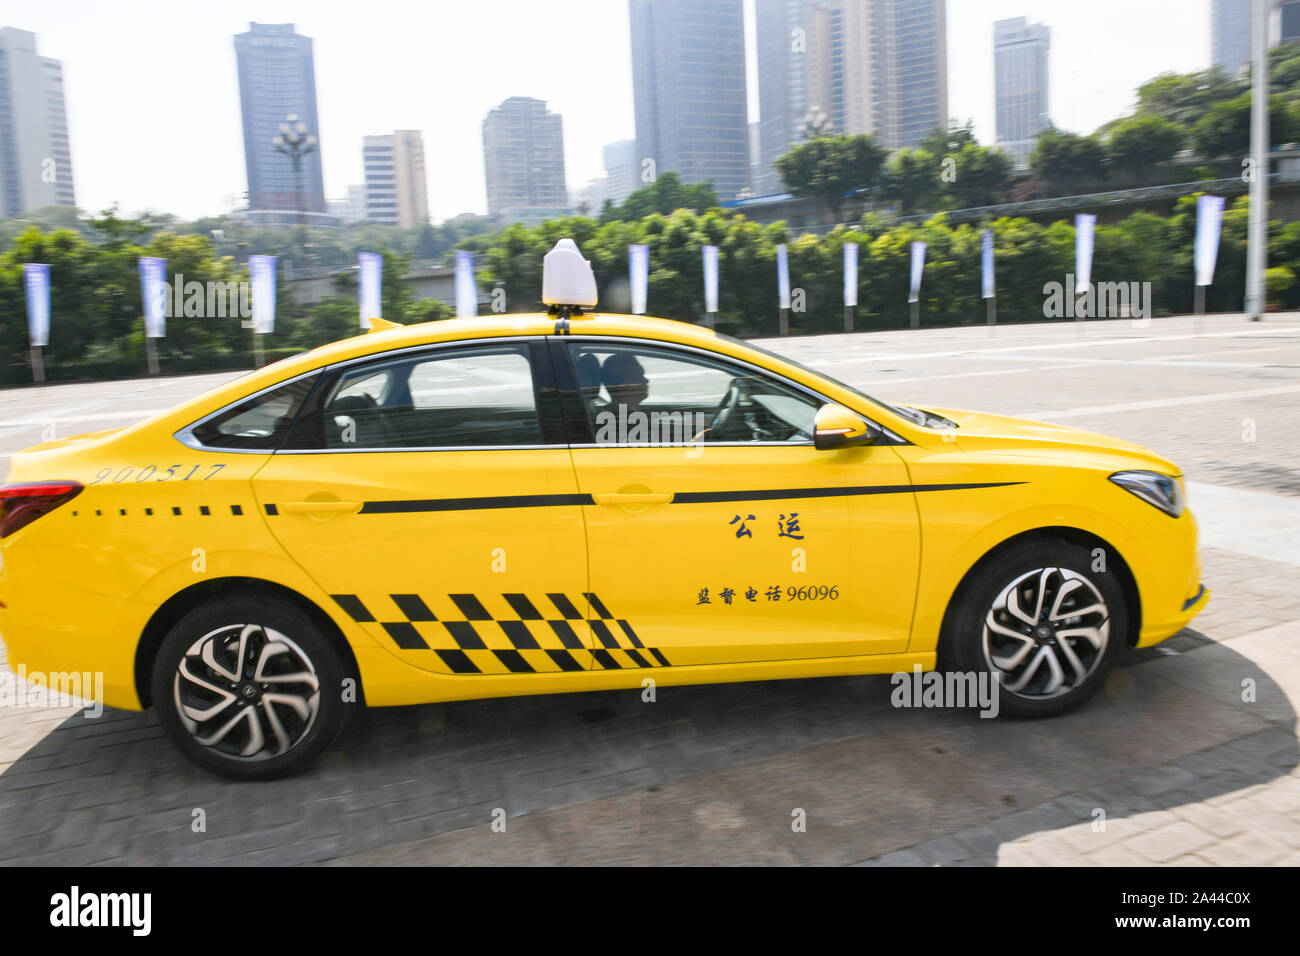 Rows of electric taxis to reduce car emissions and improve the air quality are parked in Chongqing, China, 1 August 2019. A fleet of electric taxis ha Stock Photo